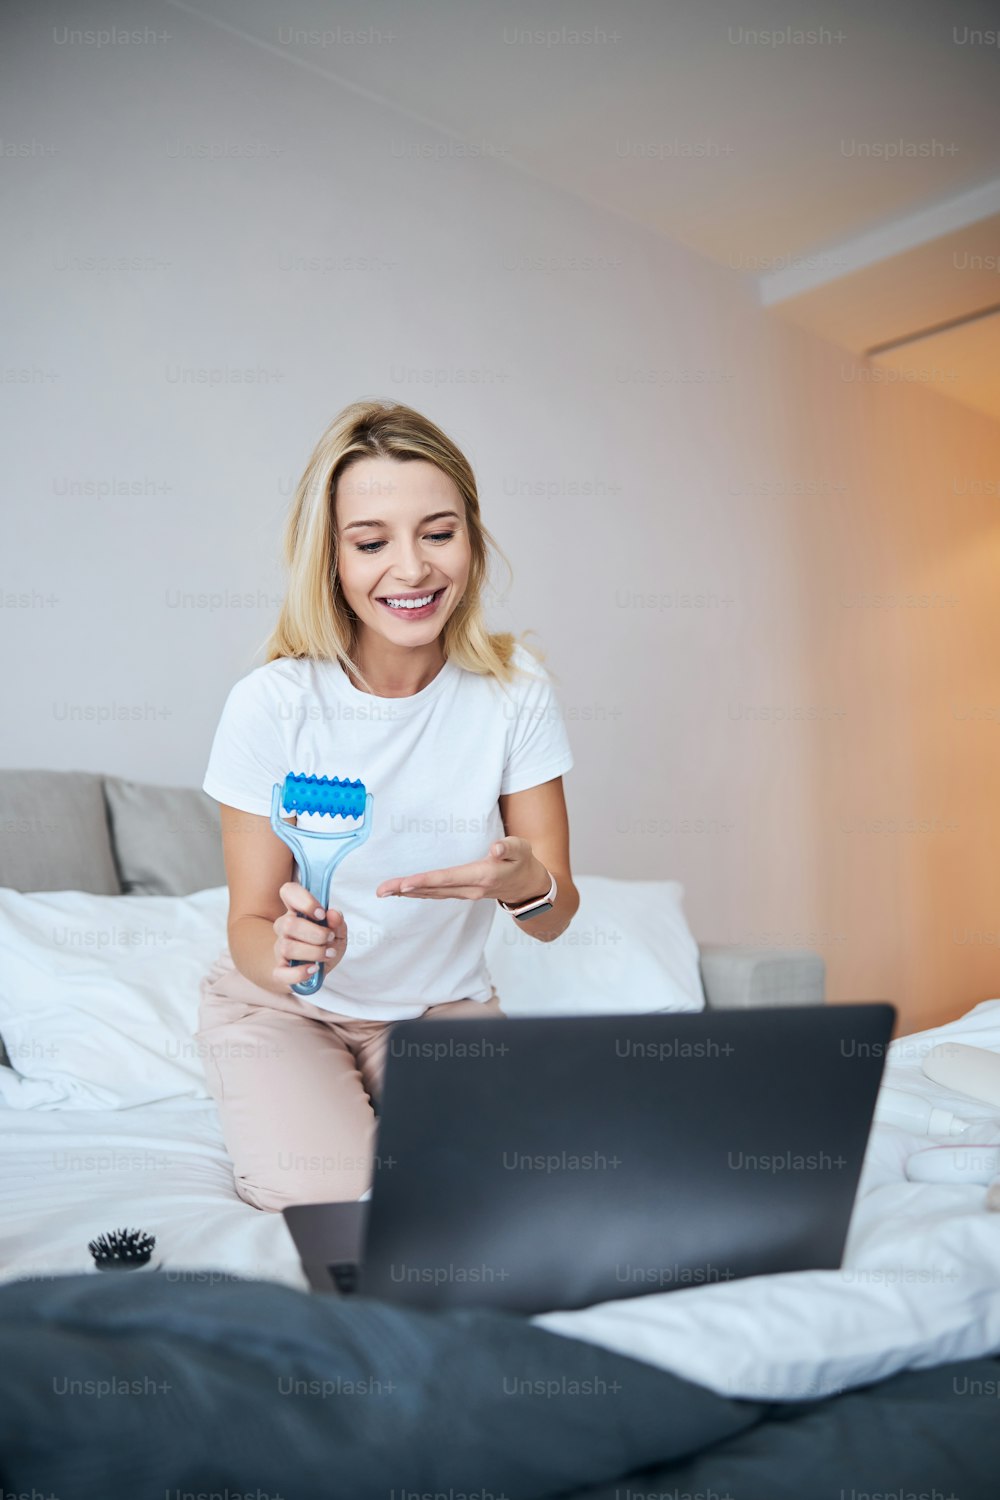 Close up portrait of happy smiling female in white shirt talking on video call with friends and demonstrating blue roller massager in room indoors